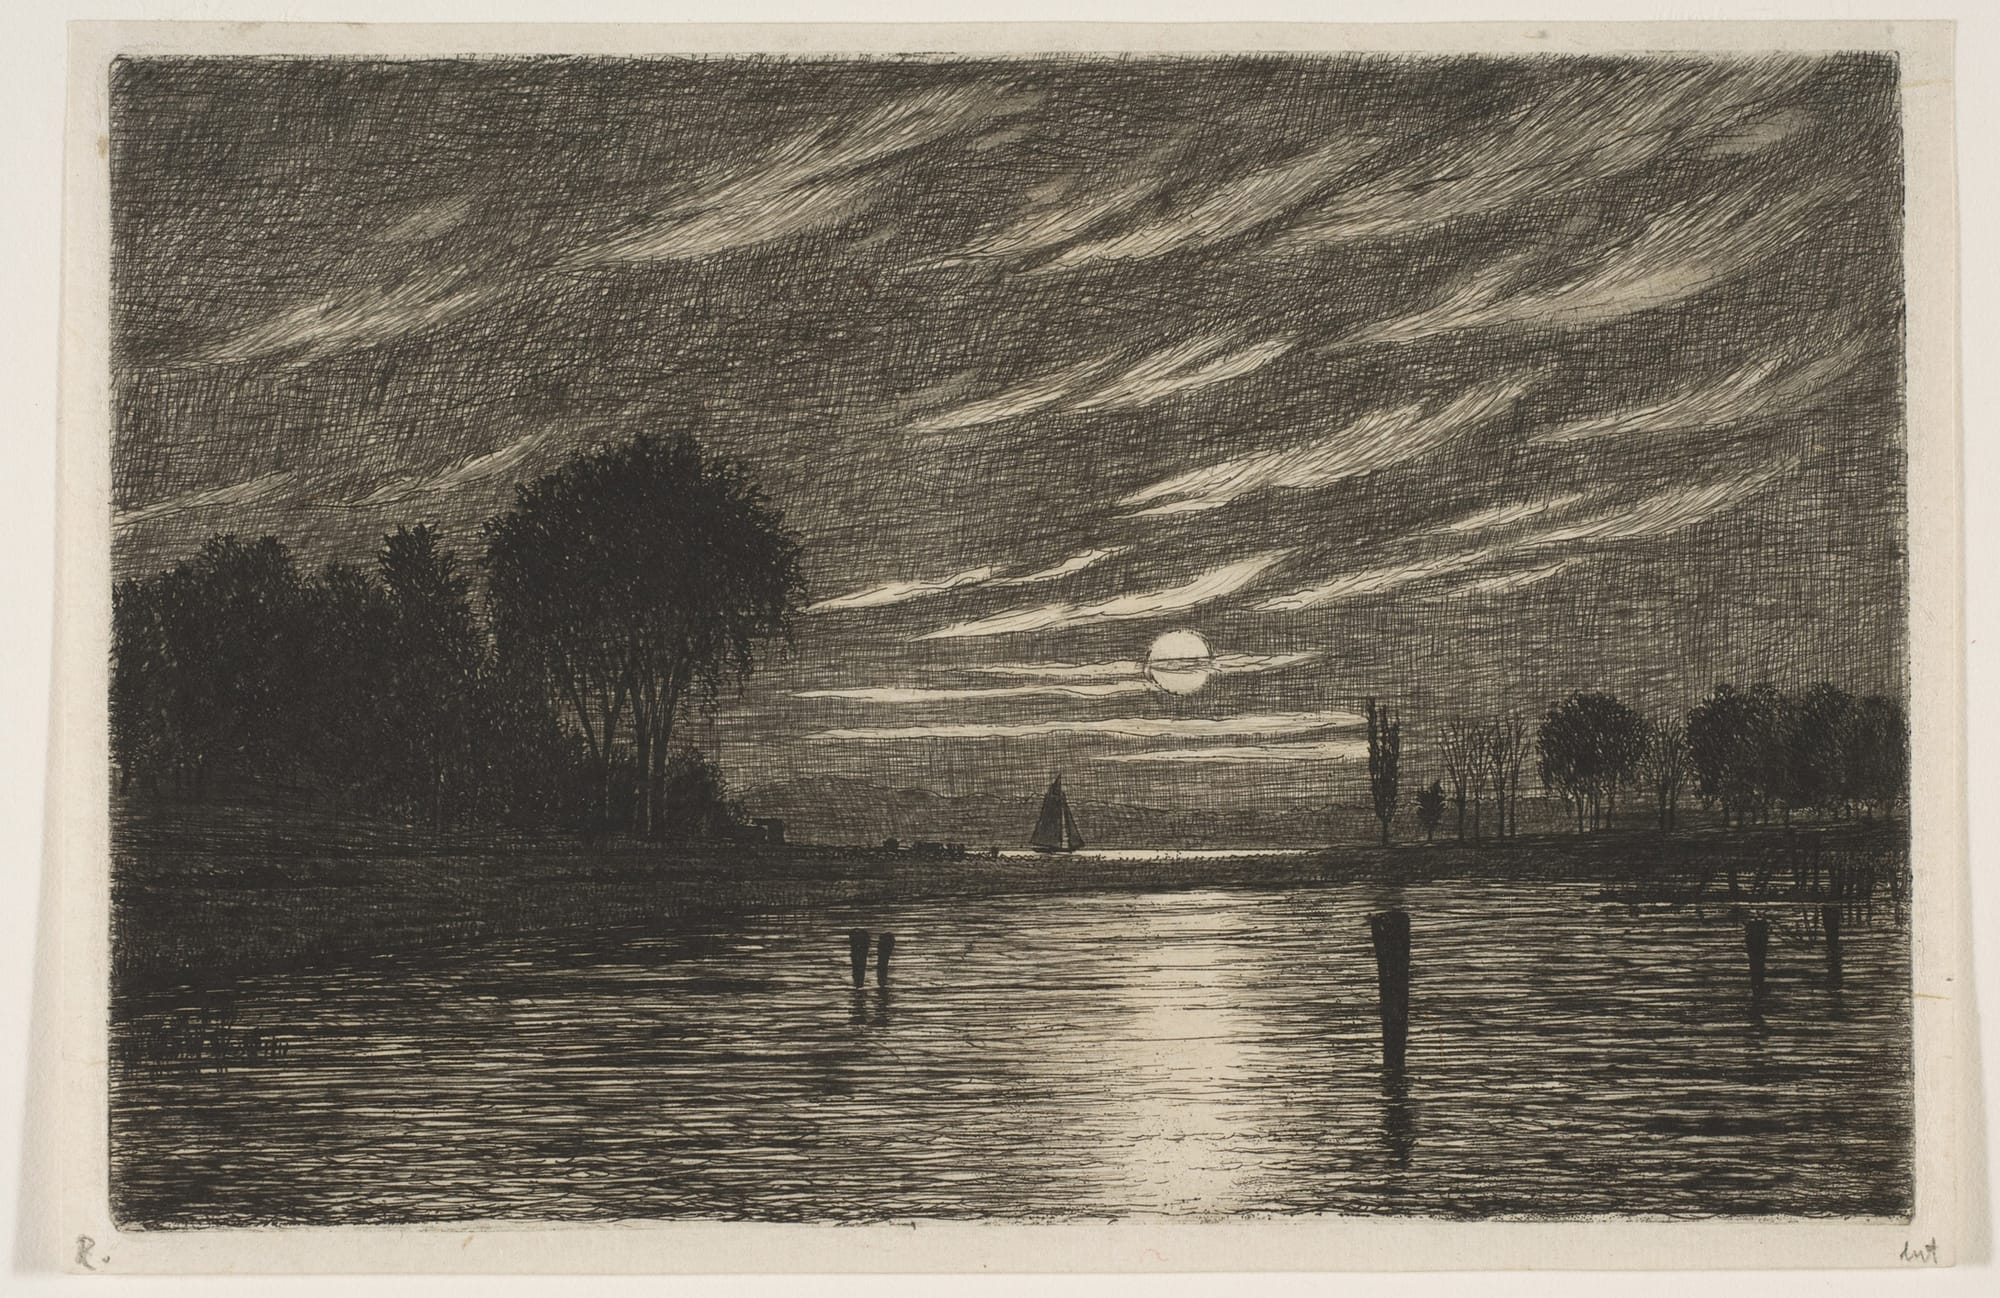 Etching of Little Hell Gate, Harlem, New York, with darkened trees on either side of moonlit water, a sailboat in the distance